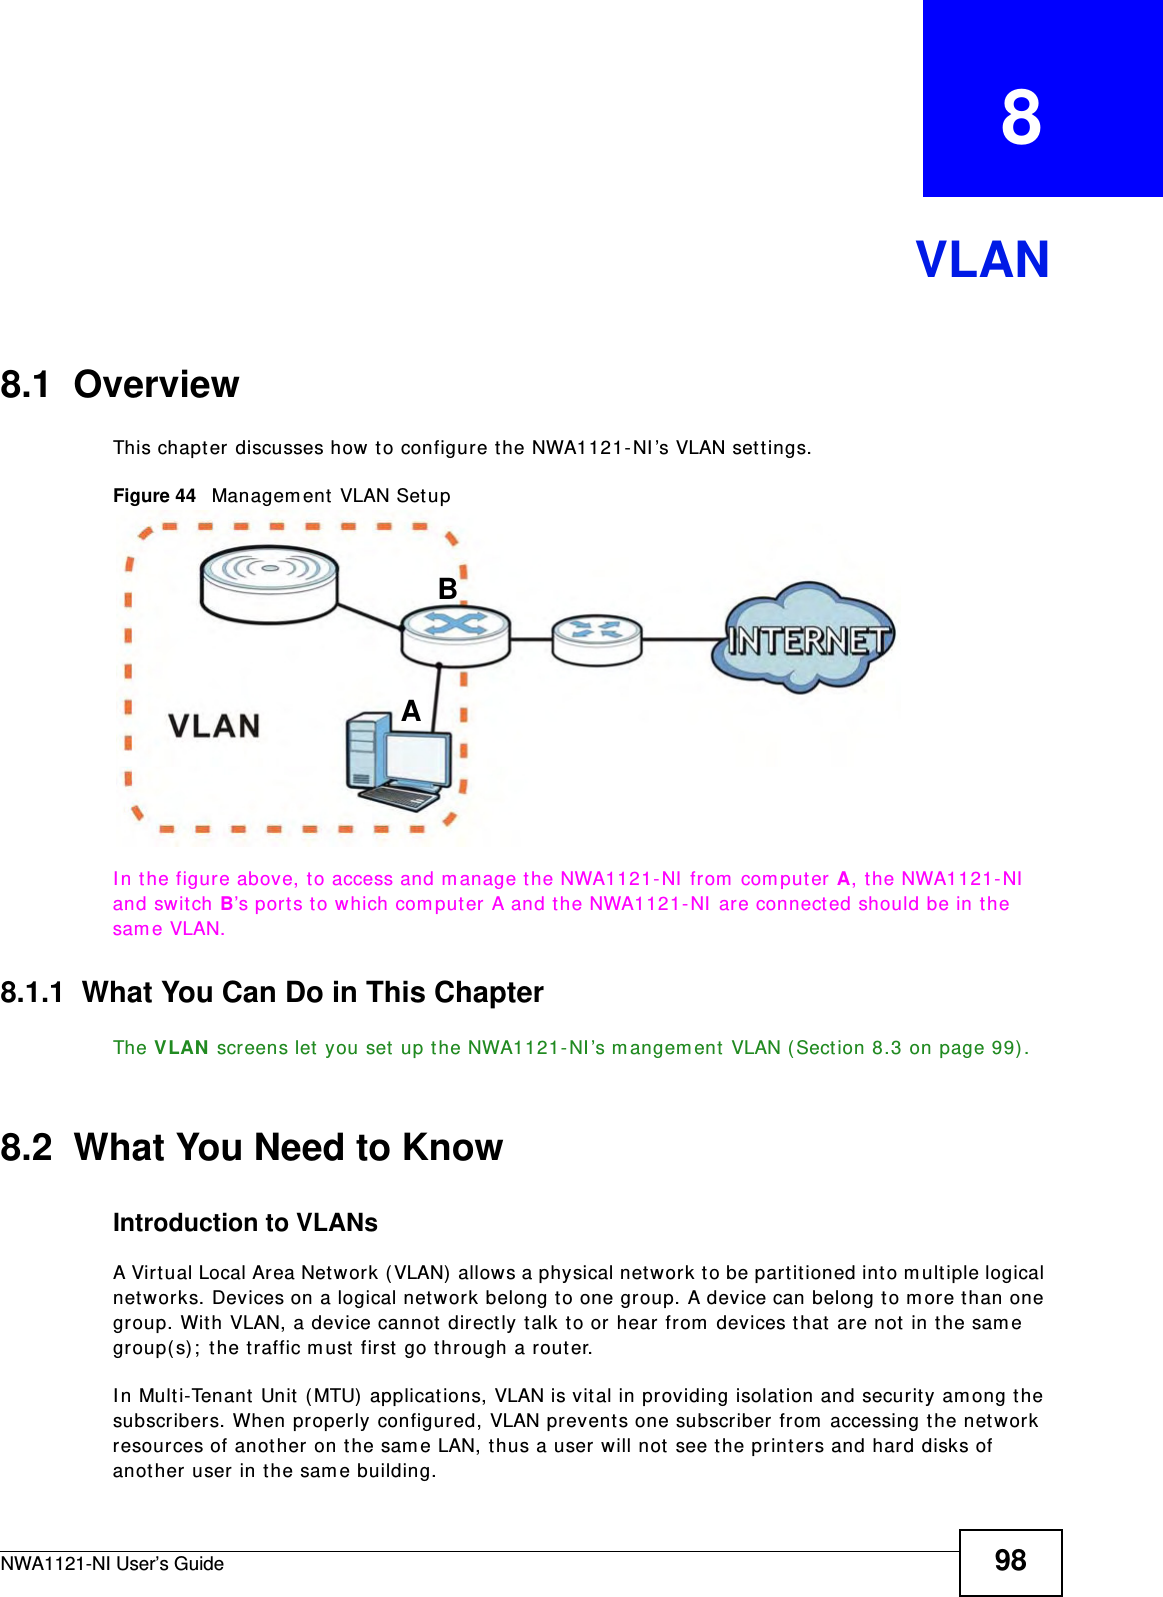 NWA1121-NI User’s Guide 98CHAPTER   8VLAN8.1  OverviewThis chapter discusses how to configure the NWA1121-NI’s VLAN settings.Figure 44   Management VLAN SetupIn the figure above, to access and manage the NWA1121-NI from computer A, the NWA1121-NI and switch B’s ports to which computer A and the NWA1121-NI are connected should be in the same VLAN.8.1.1  What You Can Do in This ChapterThe VLAN screens let you set up the NWA1121-NI’s mangement VLAN (Section 8.3 on page 99).8.2  What You Need to KnowIntroduction to VLANs A Virtual Local Area Network (VLAN) allows a physical network to be partitioned into multiple logical networks. Devices on a logical network belong to one group. A device can belong to more than one group. With VLAN, a device cannot directly talk to or hear from devices that are not in the same group(s); the traffic must first go through a router.In Multi-Tenant Unit (MTU) applications, VLAN is vital in providing isolation and security among the subscribers. When properly configured, VLAN prevents one subscriber from accessing the network resources of another on the same LAN, thus a user will not see the printers and hard disks of another user in the same building. AB